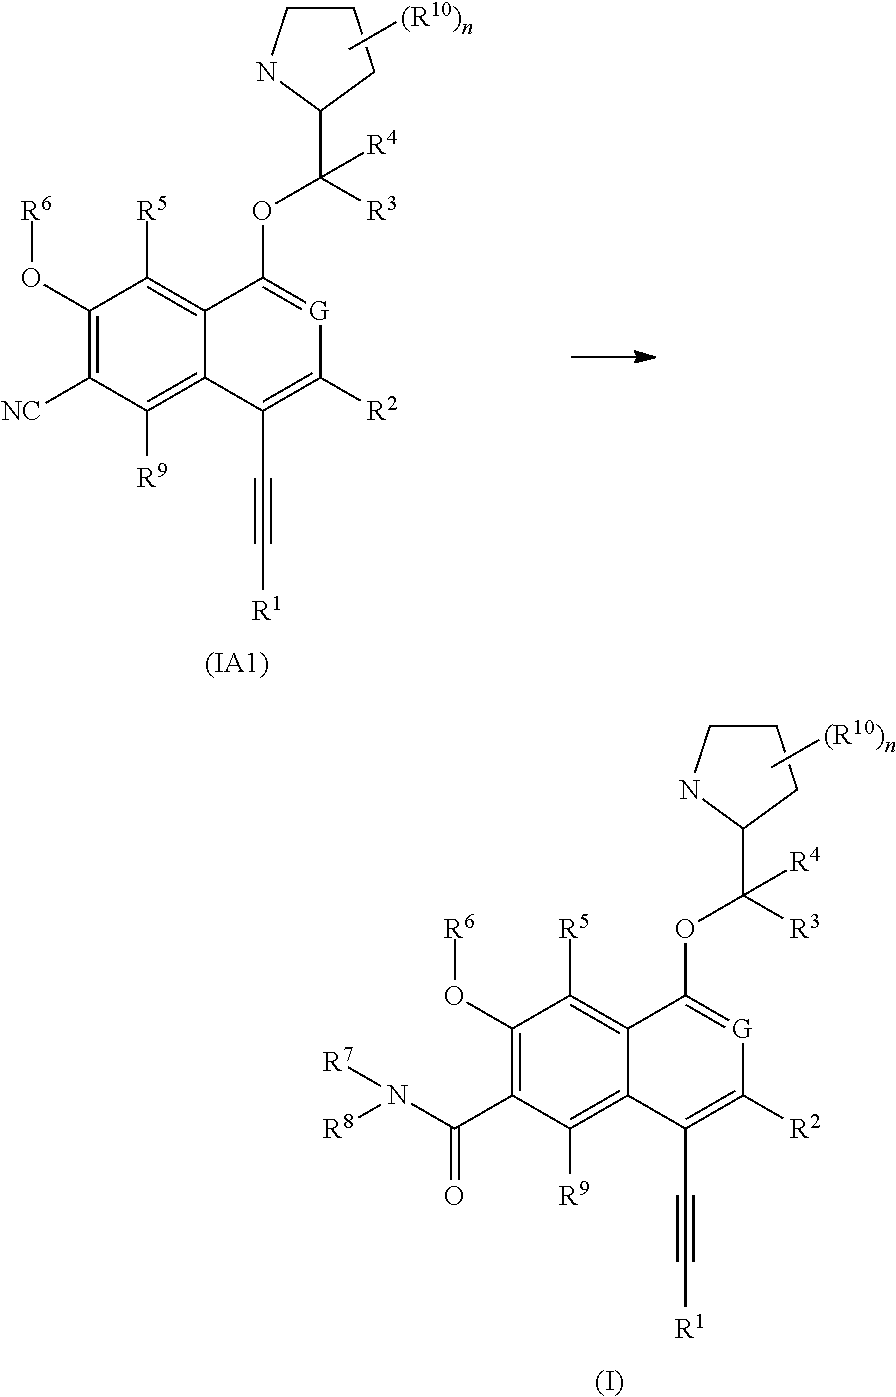 Alkyne compounds as irak inhibitors, preparation methods and medicinal uses thereof